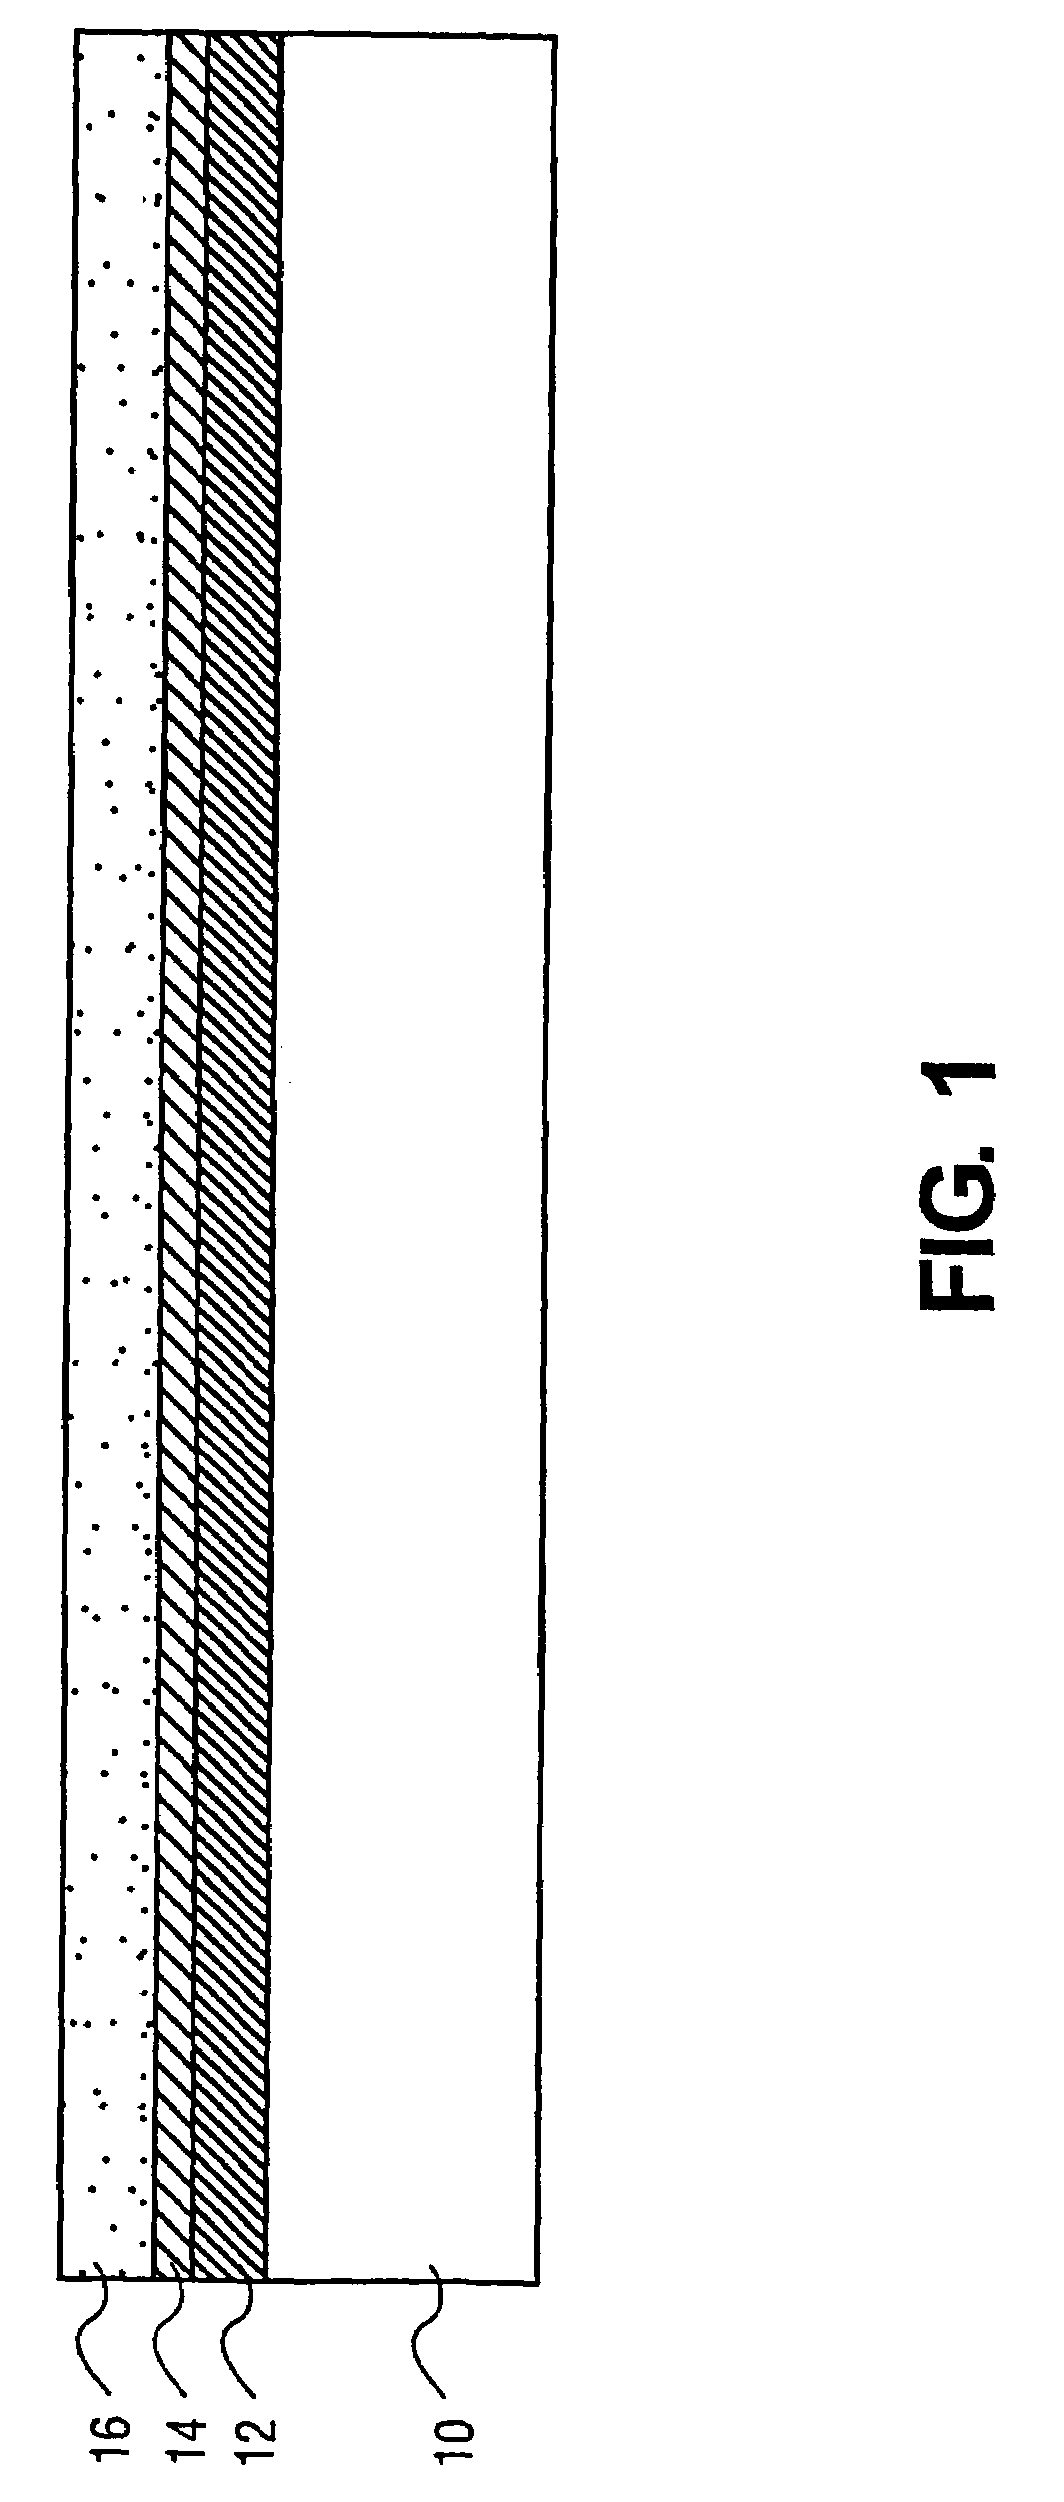 Micro-electromechanical structure resonator frequency adjustment using radiant energy trimming and laser/focused ion beam assisted deposition